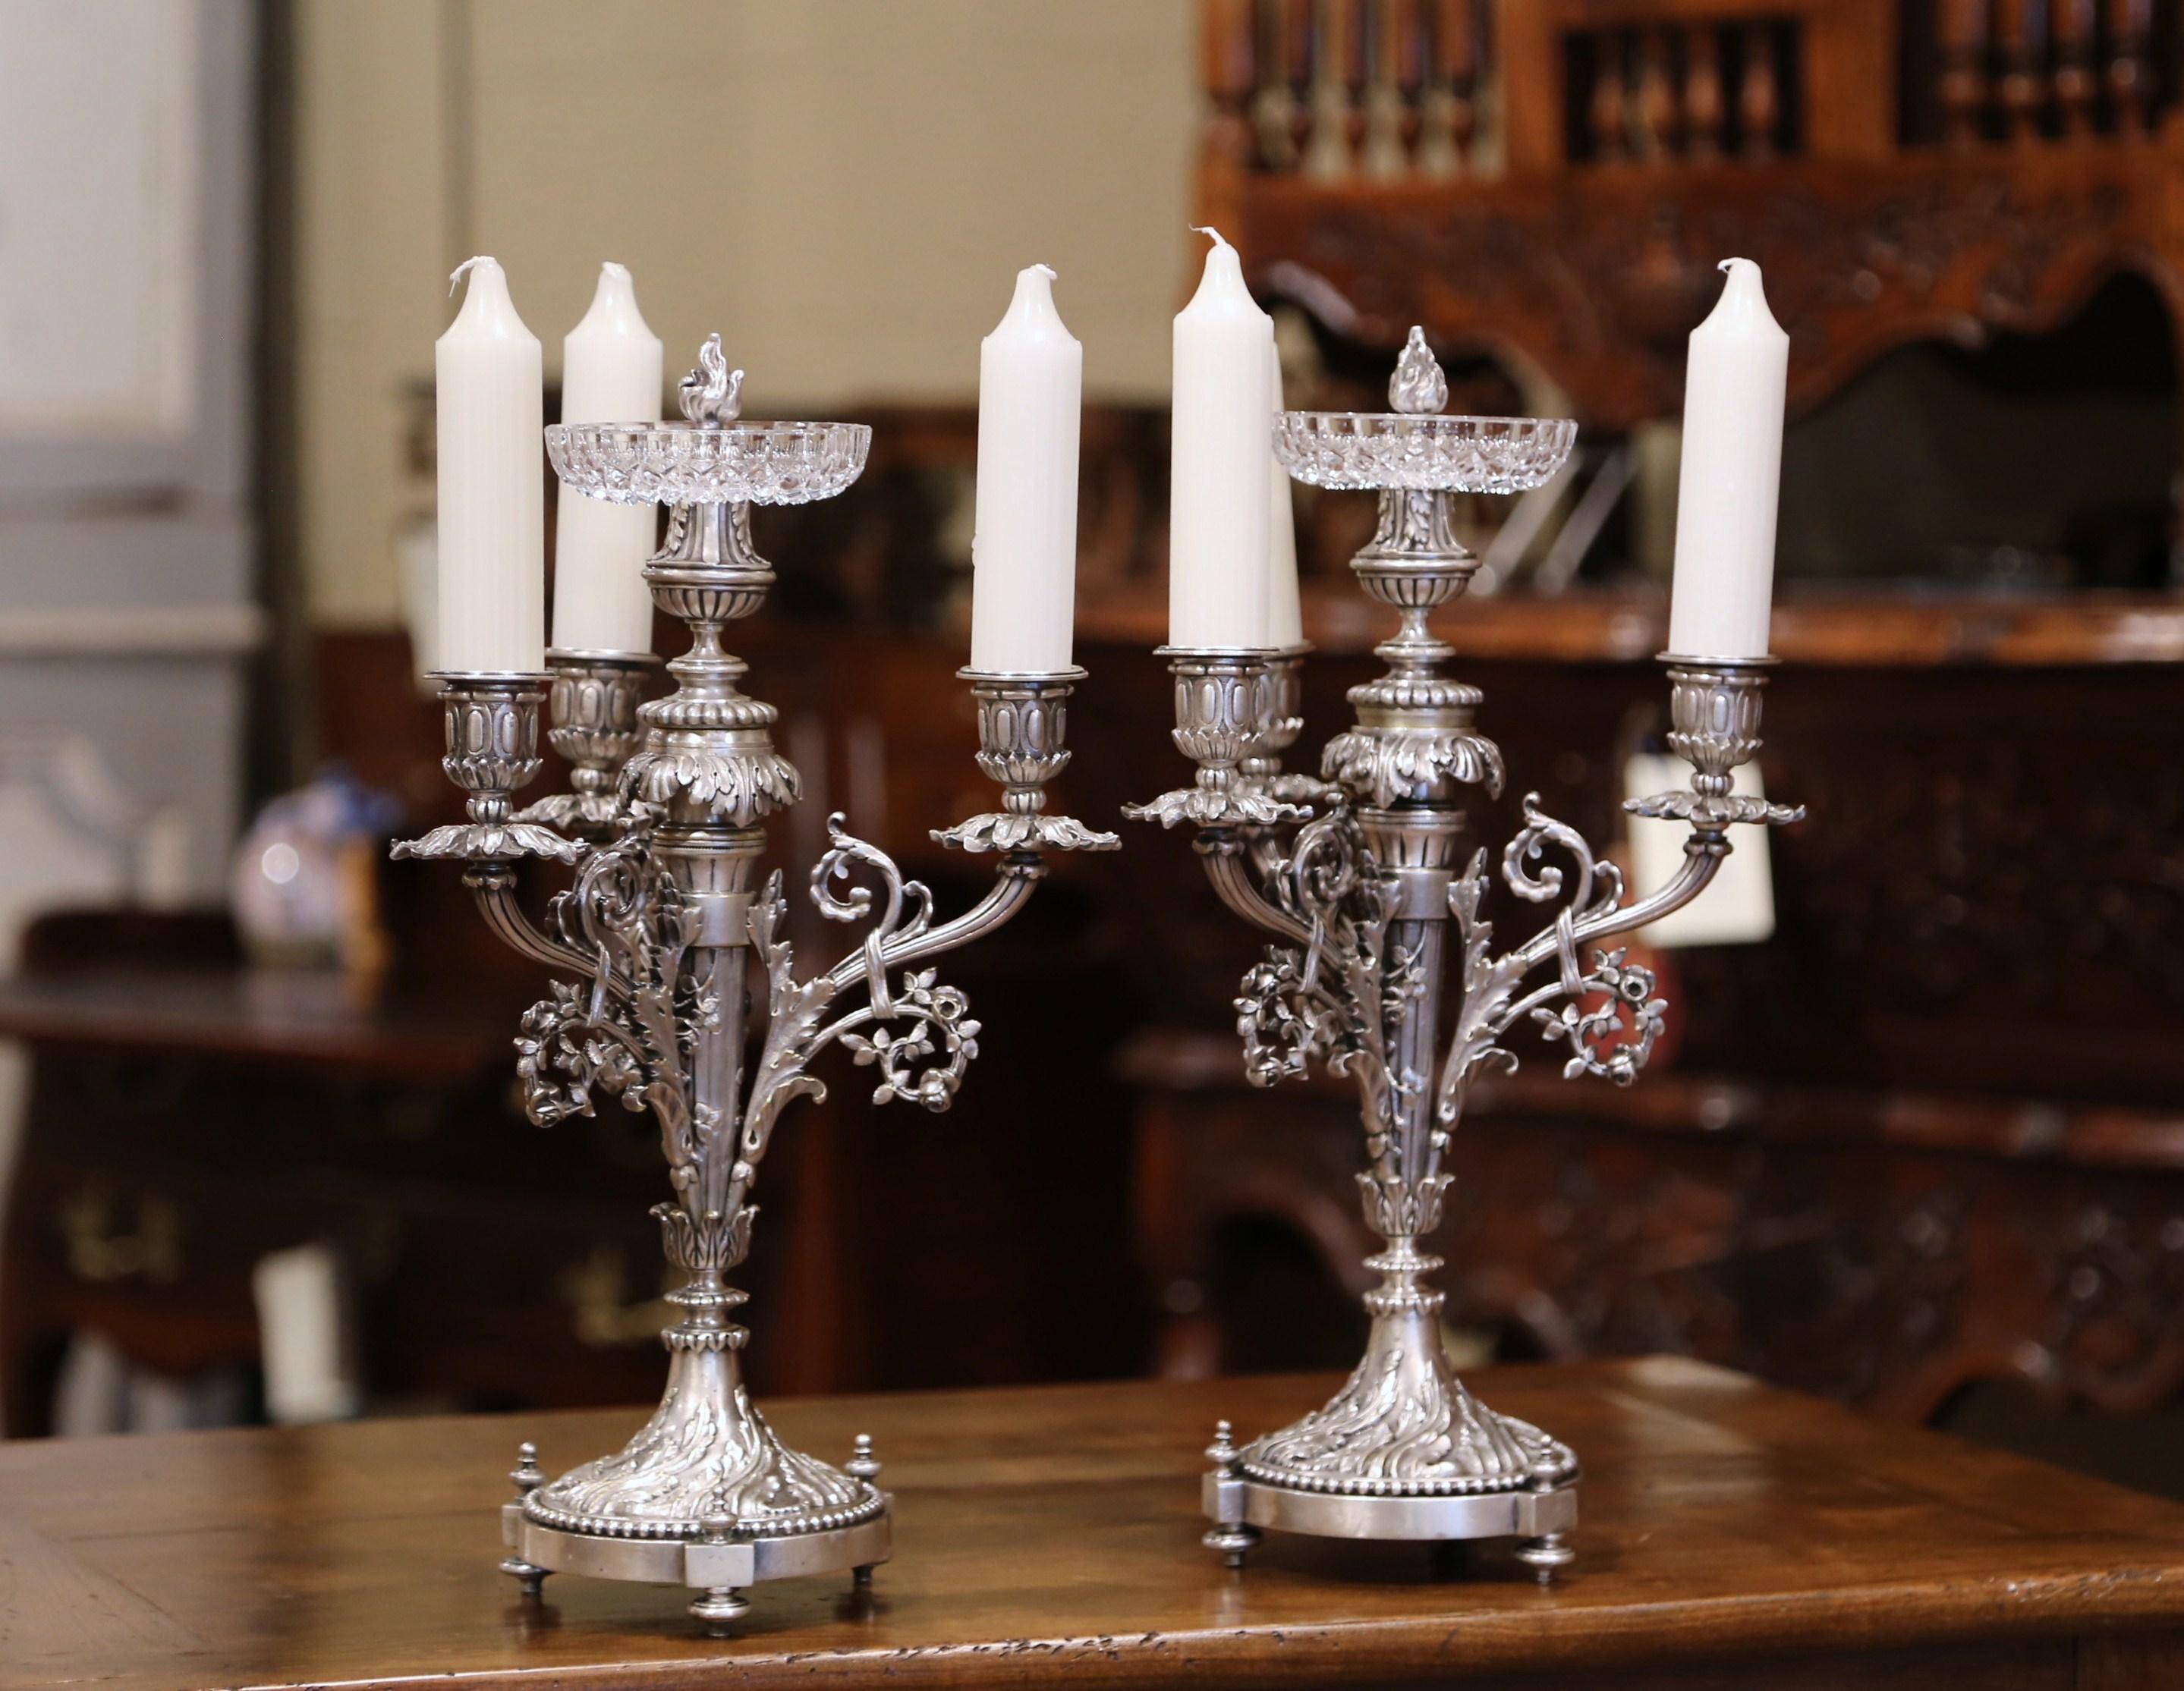 Decorate a table with this pair of impressive, antique candelabras. Crafted in France, circa 1890, each piece has three arms and stands on a round base with small feet. The base is decorated with acanthus leaves and the stem is embellished with